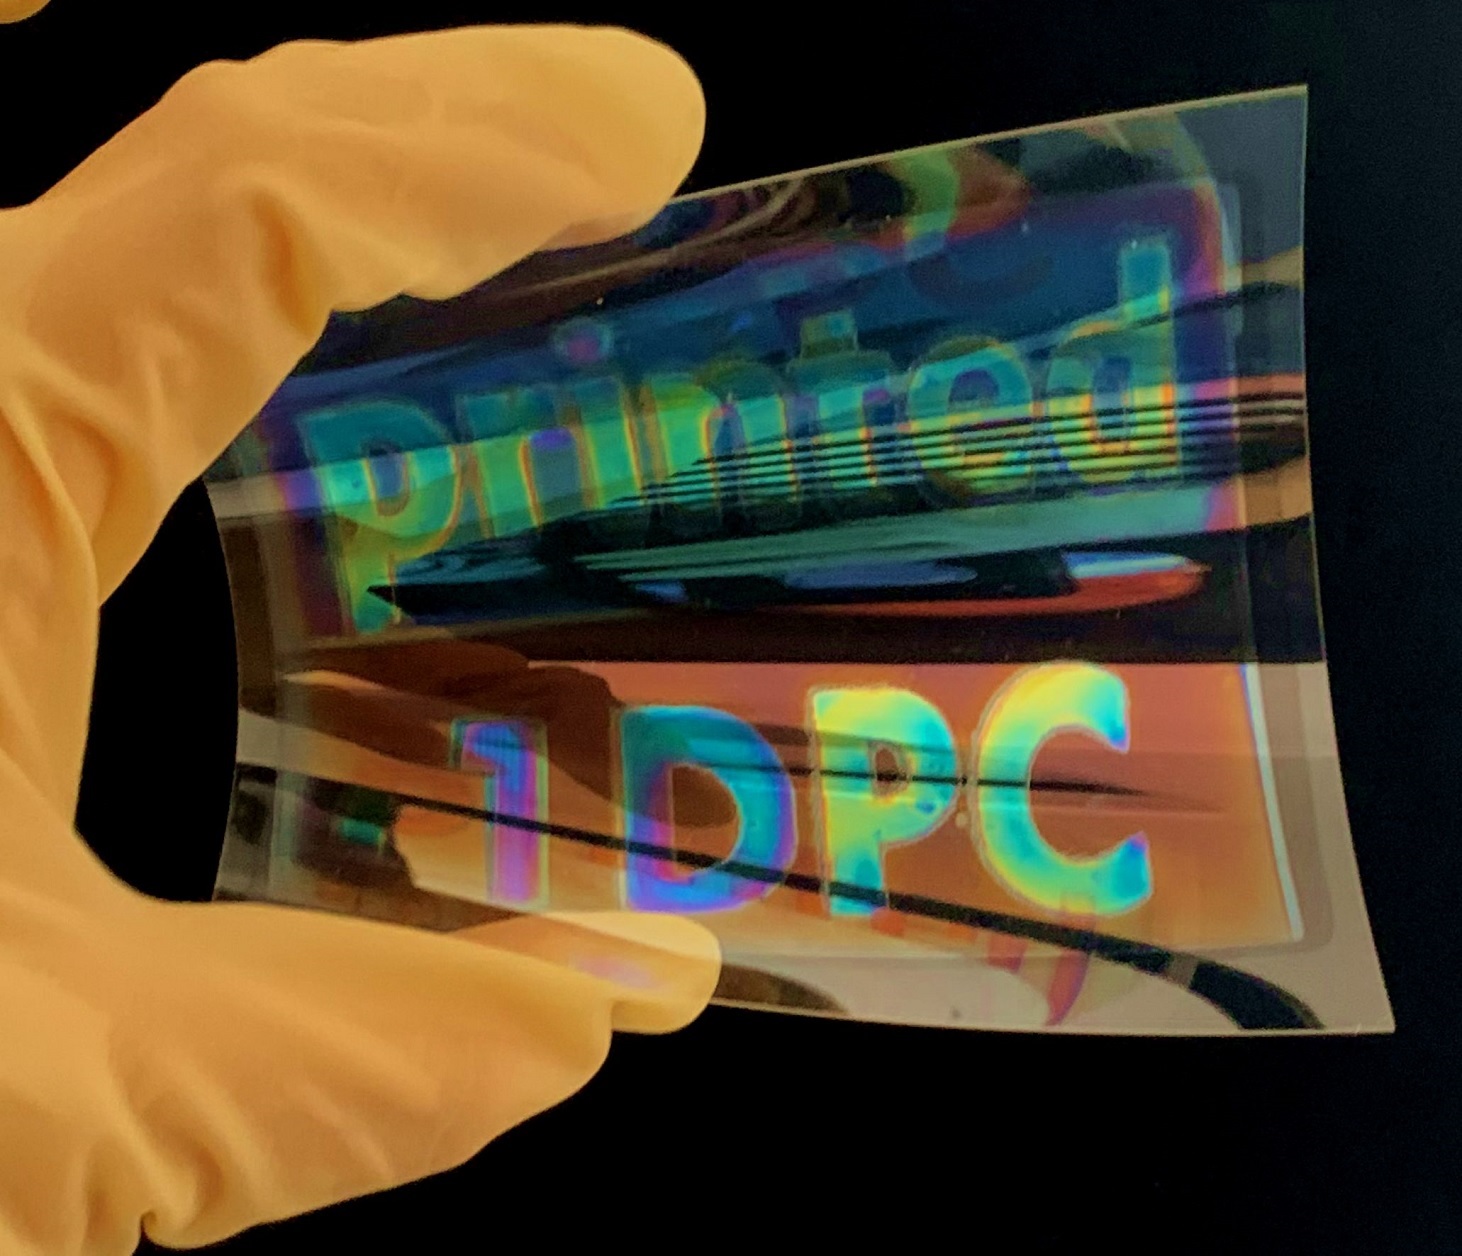 Colored mirror layer printed onto a foil. Inkjet printing allows for structurization, such that large-area logos can be printed as well